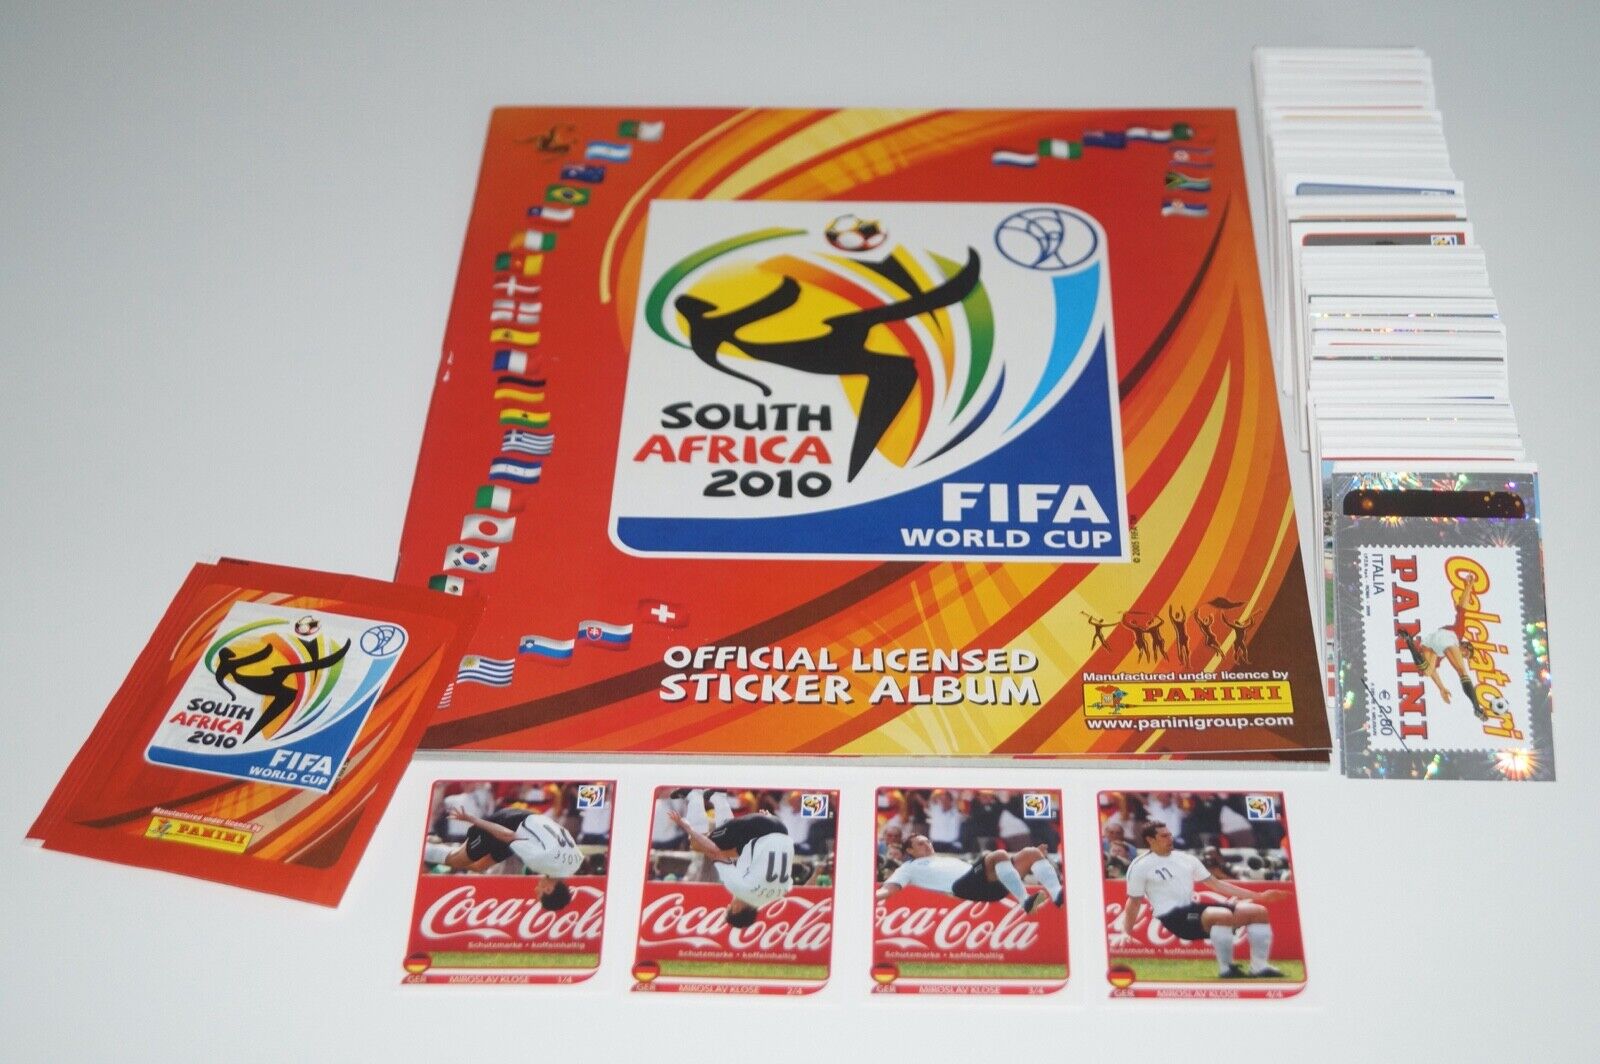 PANINI World Cup 2010 South Africa 10 World Cup - complete set + album + 4 toilets + original packaging bag